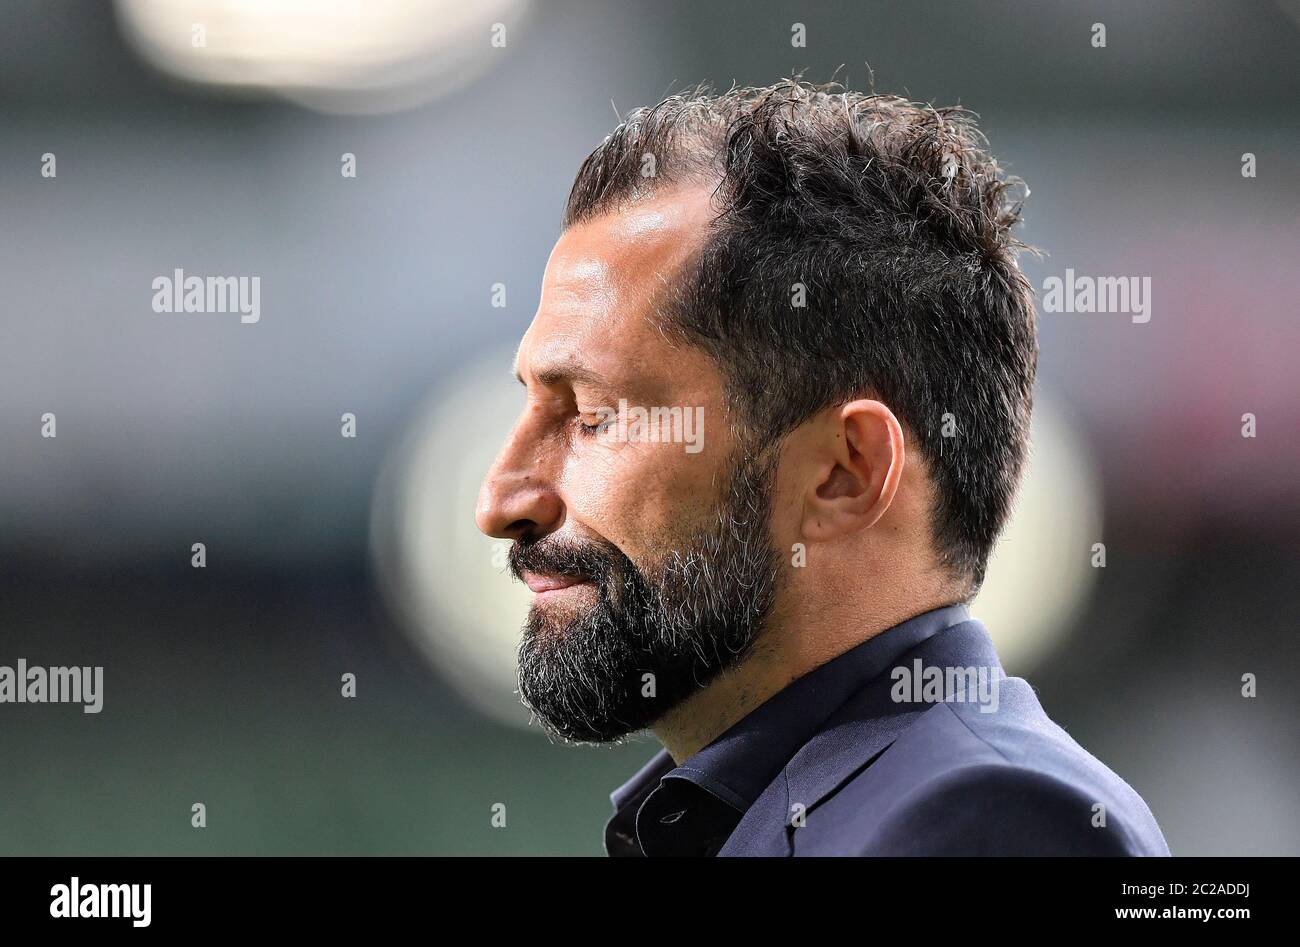 Bremen, Germany. 16th June, 2020. Football: Bundesliga, Werder Bremen - FC Bayern Munich, 32nd matchday at the Wohninvest Weser Stadium. Bayern sports director Hasan Salihamidzic closes his eyes before the soccer match. Credit: Martin Meissner/AP-Pool/dpa - IMPORTANT NOTE: In accordance with the regulations of the DFL Deutsche Fußball Liga and the DFB Deutscher Fußball-Bund, it is prohibited to exploit or have exploited in the stadium and/or from the game taken photographs in the form of sequence images and/or video-like photo series./dpa/Alamy Live News Stock Photo